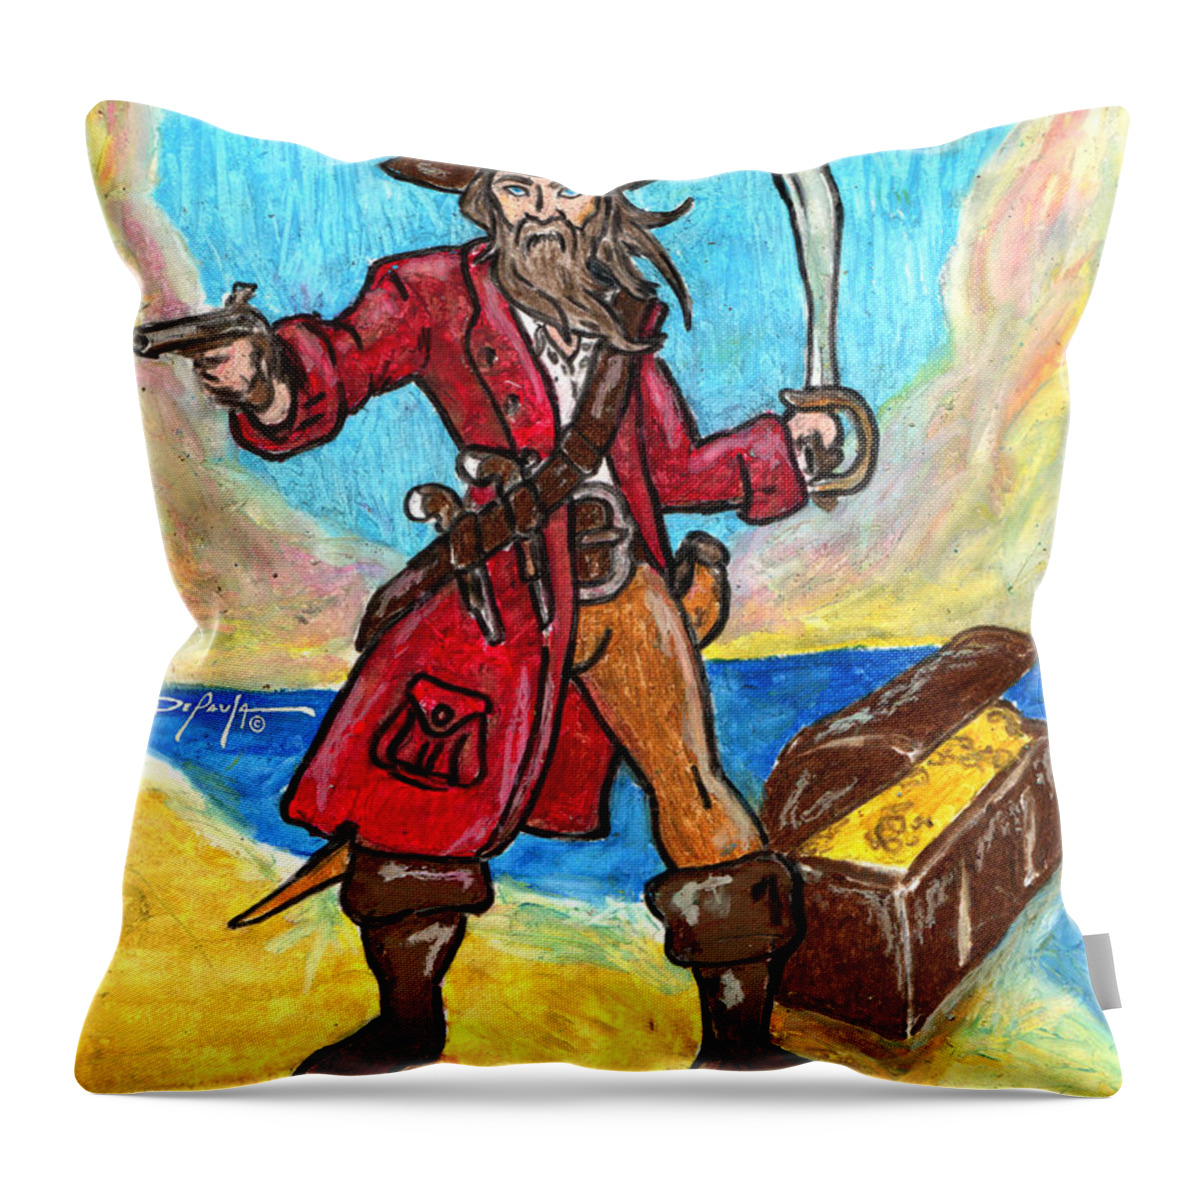 Pirate Throw Pillow featuring the mixed media Captain's Treasure by William Depaula